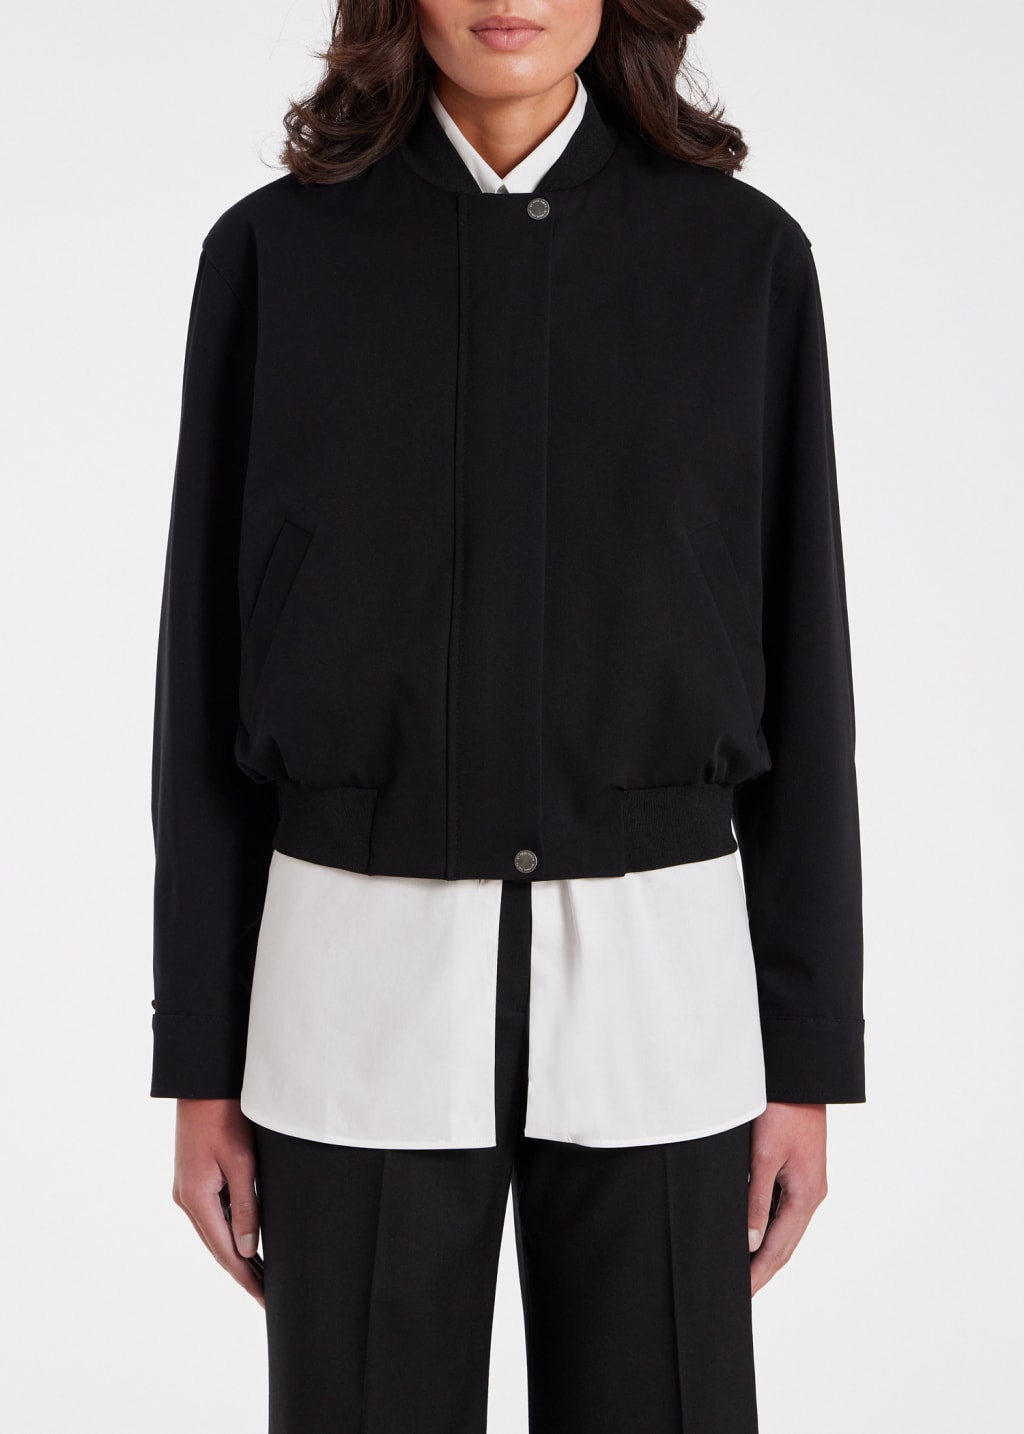 Model View - Women's Black Cotton Bomber Jacket by Paul Smith